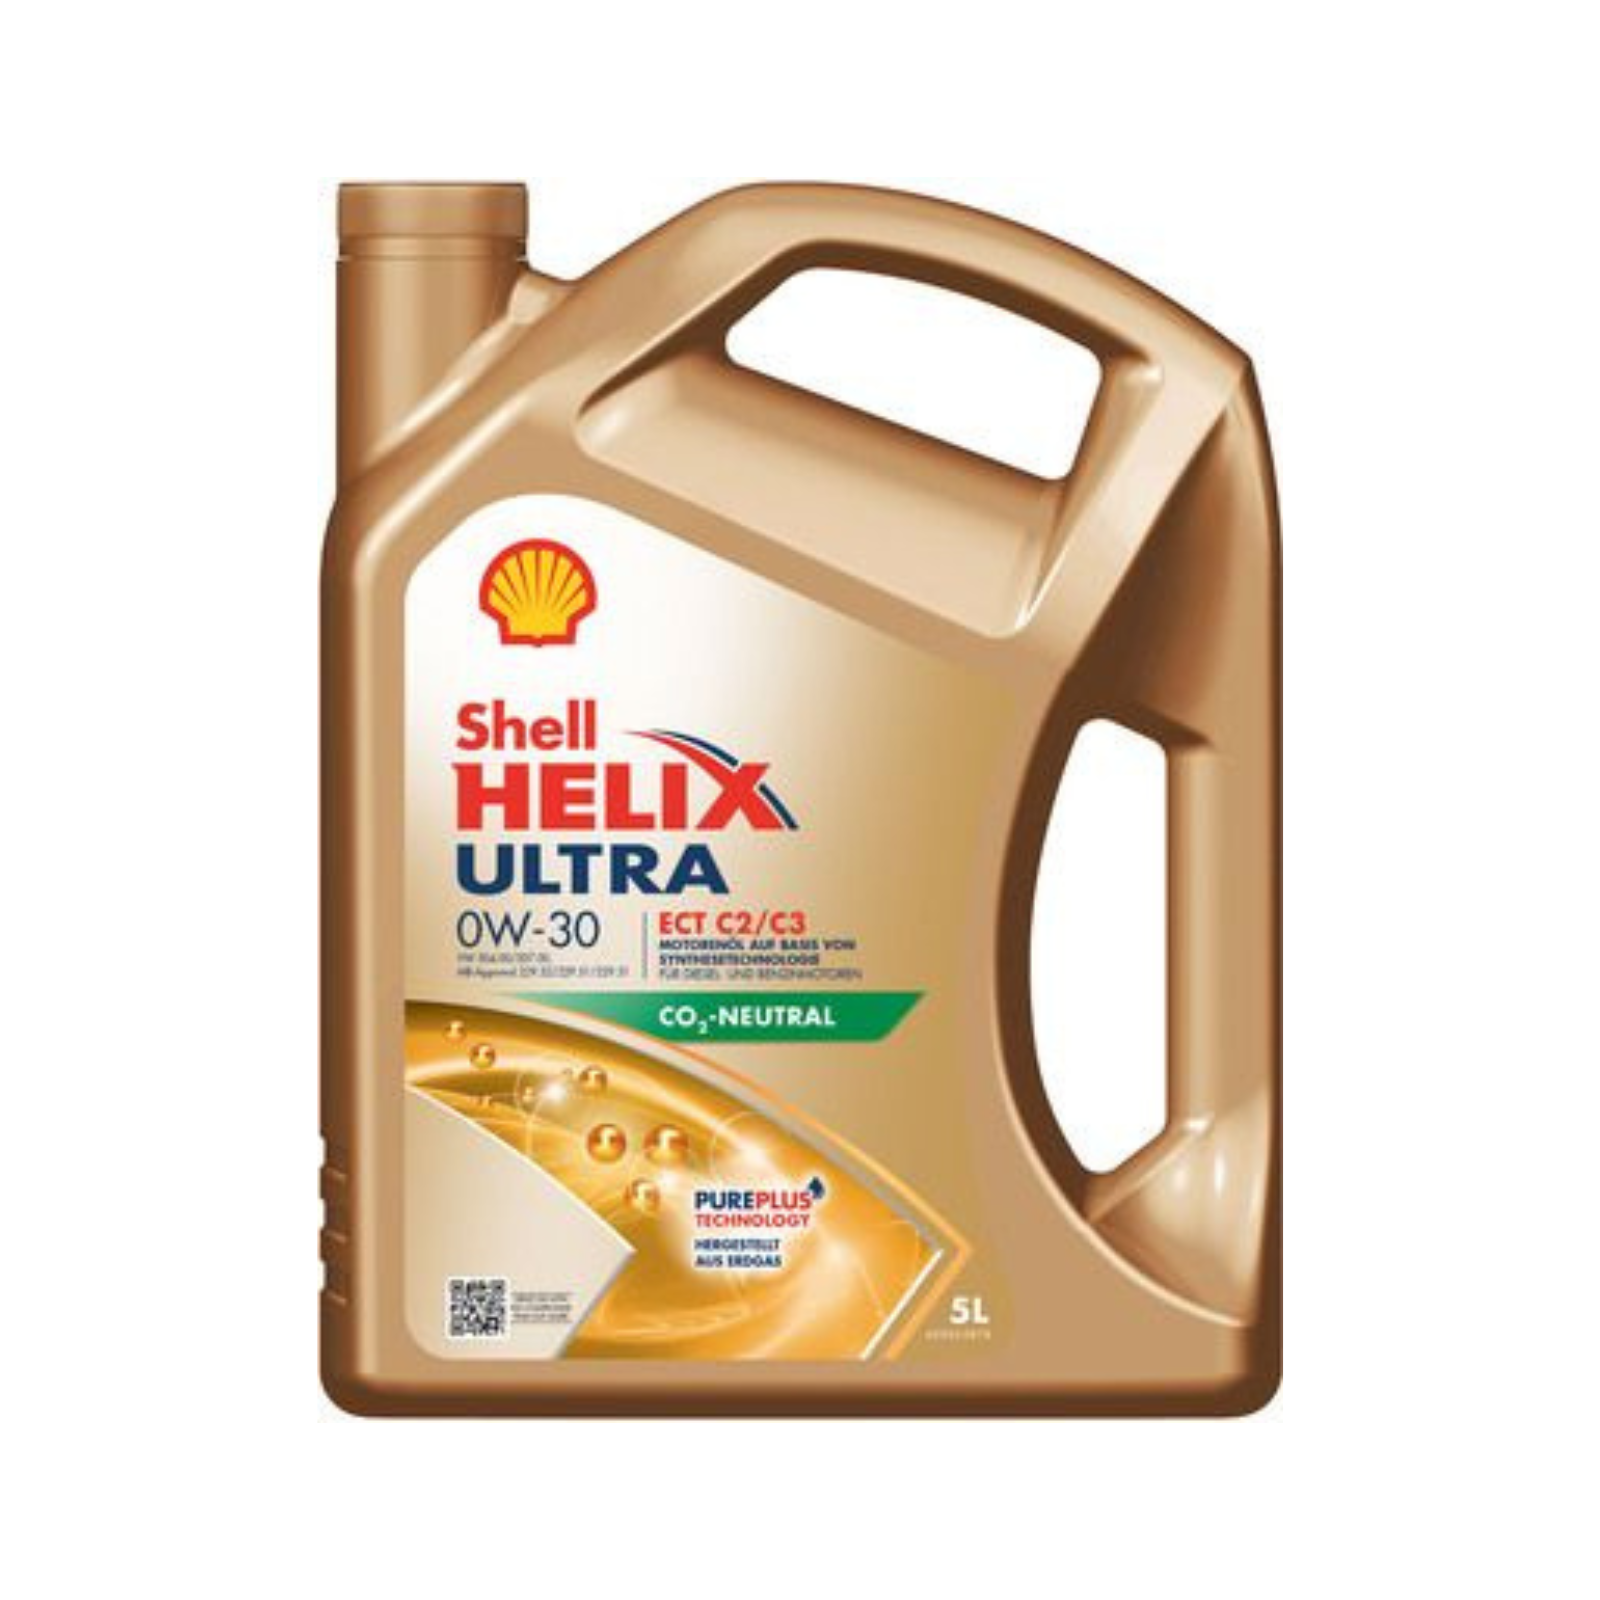 Shell Helix Ultra ECT C2/C3 0W-30 5L Engine Oil